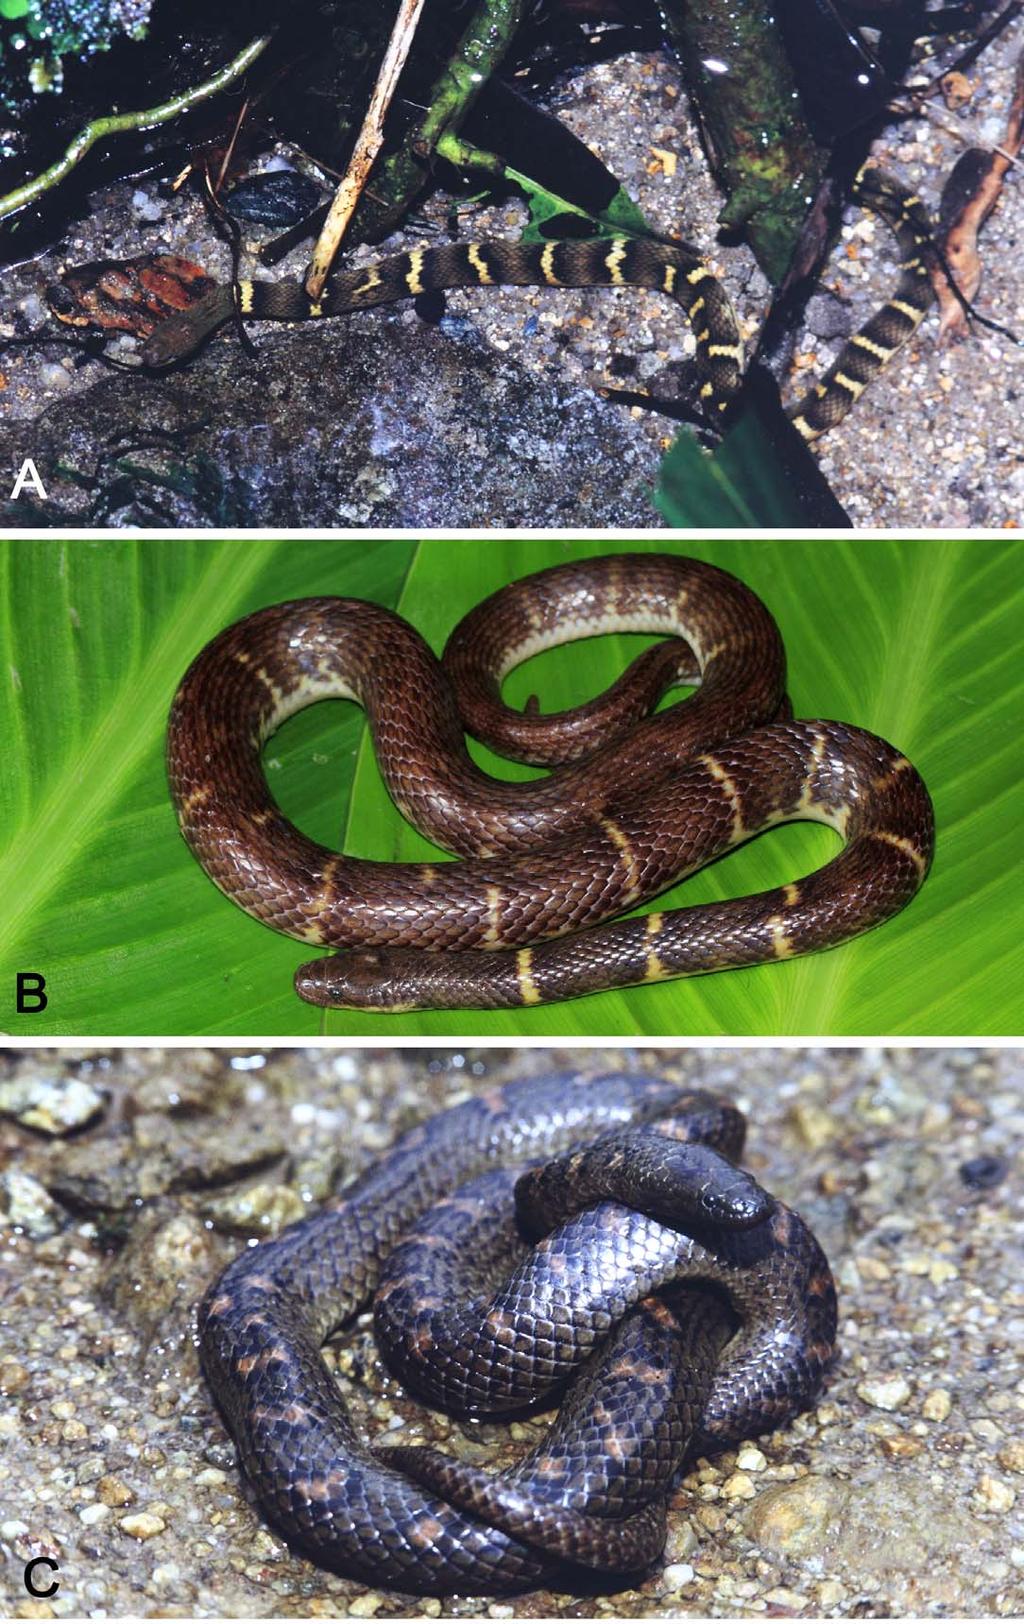 FIGURE 3. (A) General aspect in life of the holotype of Opisthotropis laui sp. nov., (B) General aspect in life of O.